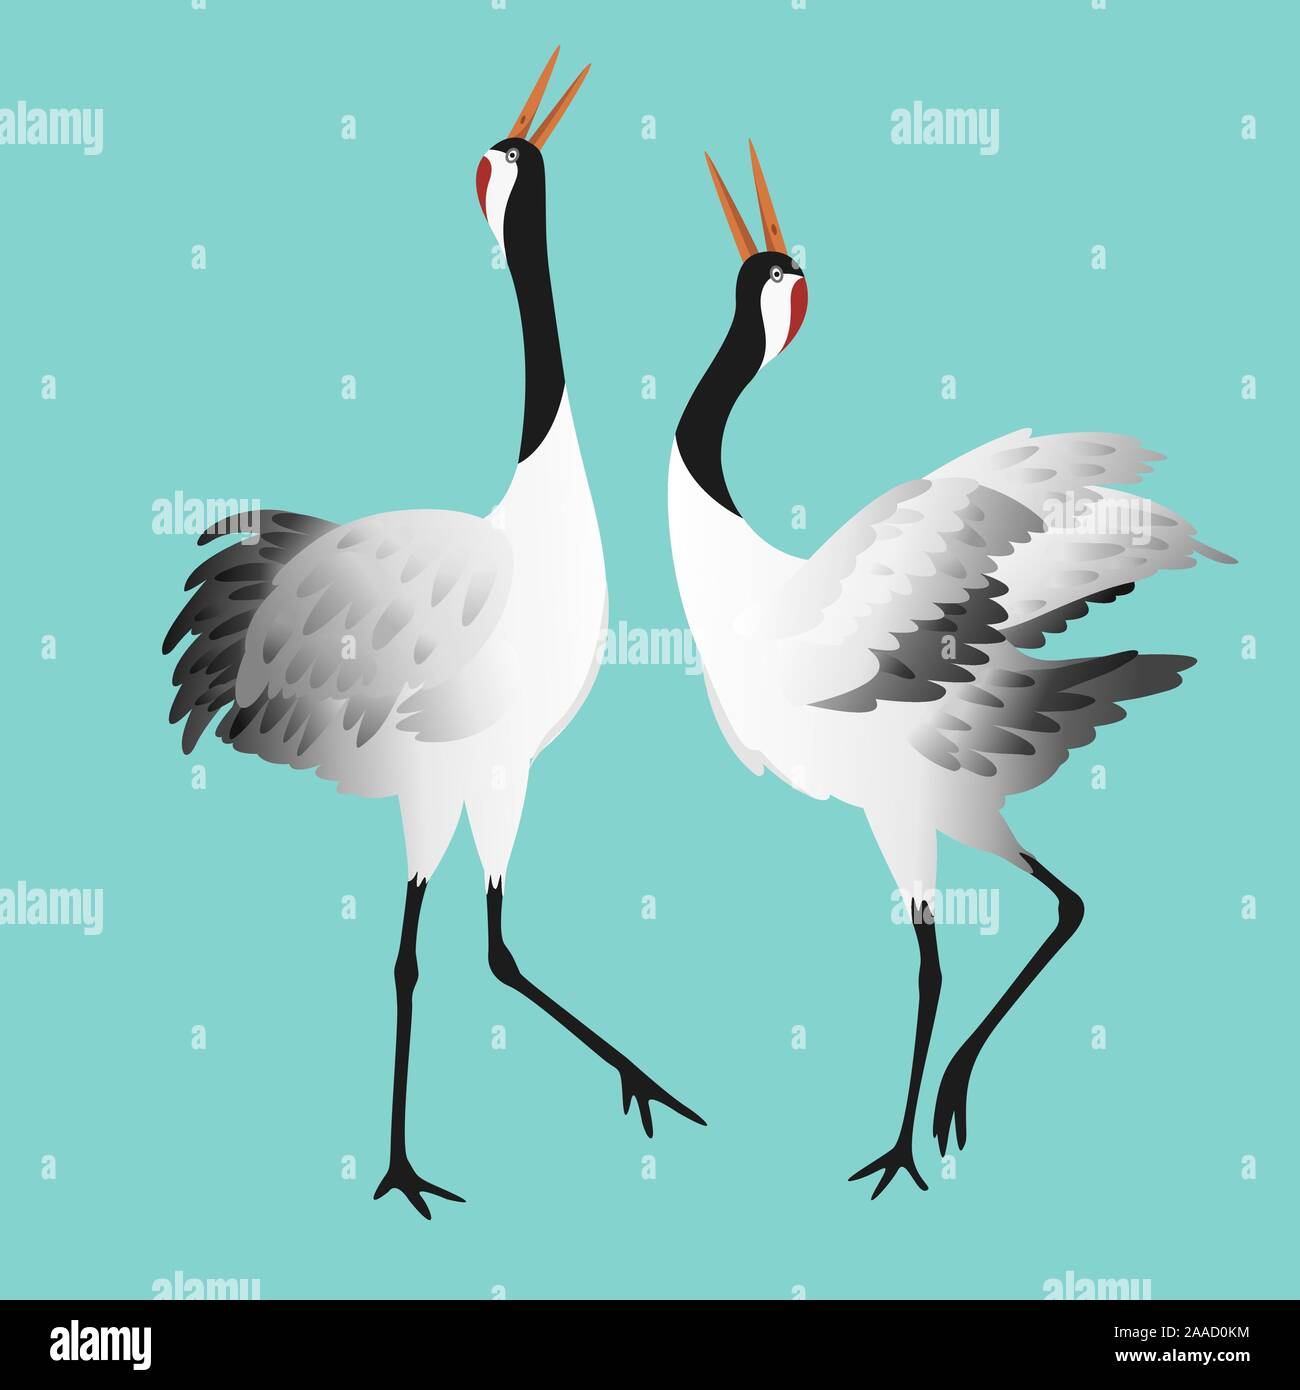 Japanese dancing red-crowned crane in different poses isolated Stock Vector